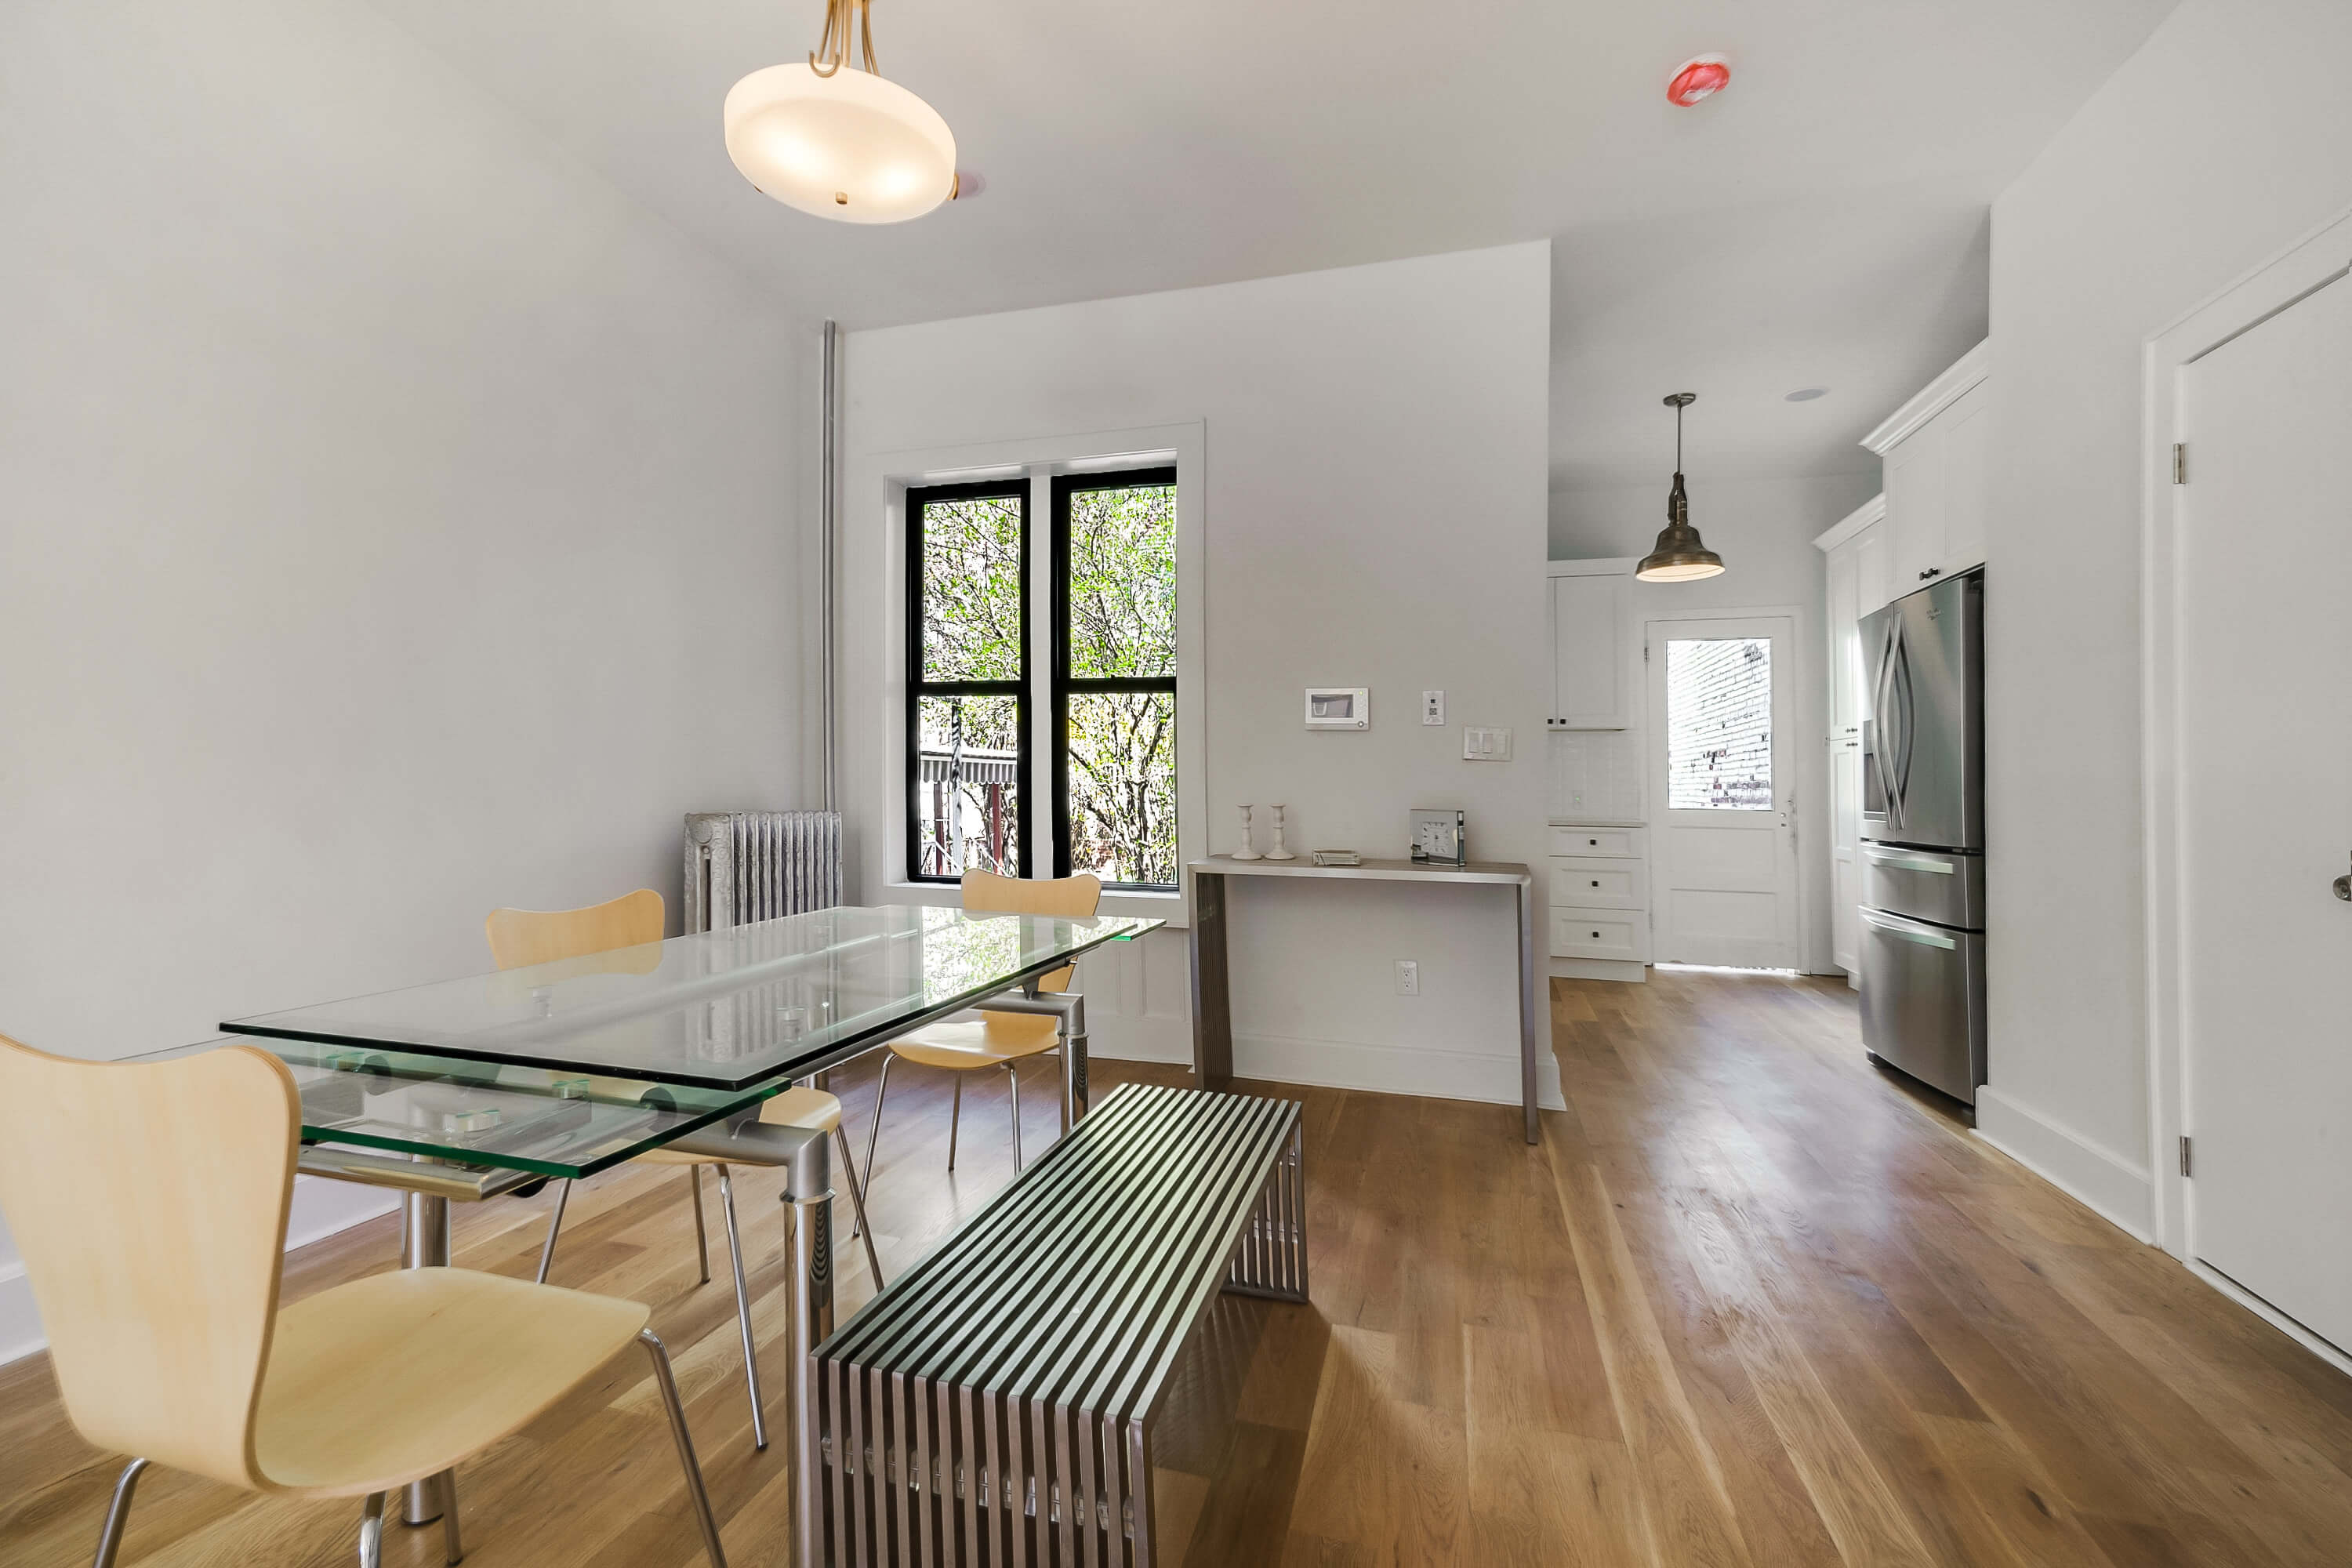 Brooklyn Homes for Sale in Prospect Lefferts Gardens at 289 Ste